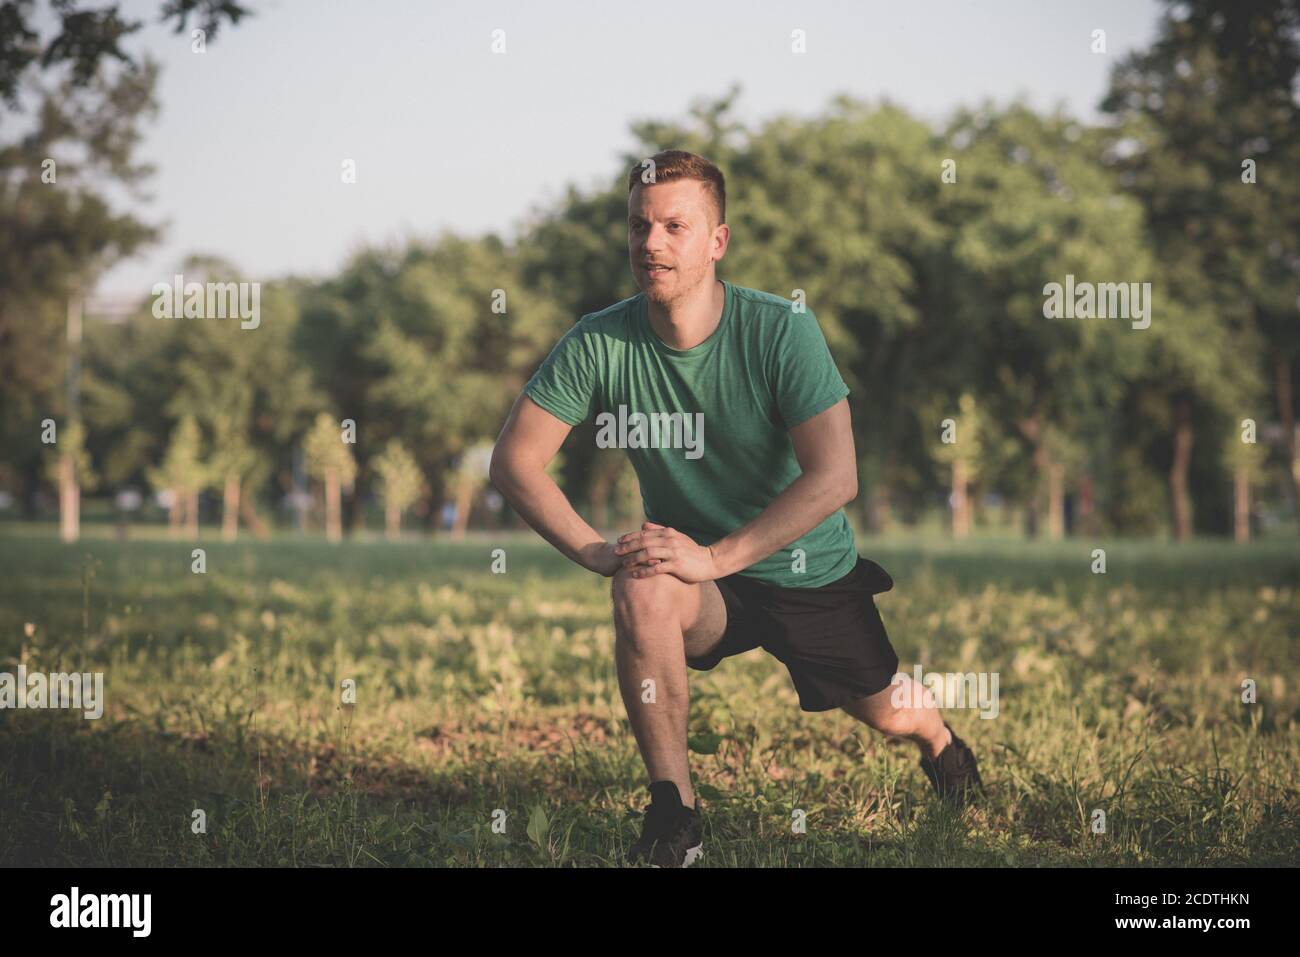 Guy stretching legs during warming-up for jogging Stock Photo